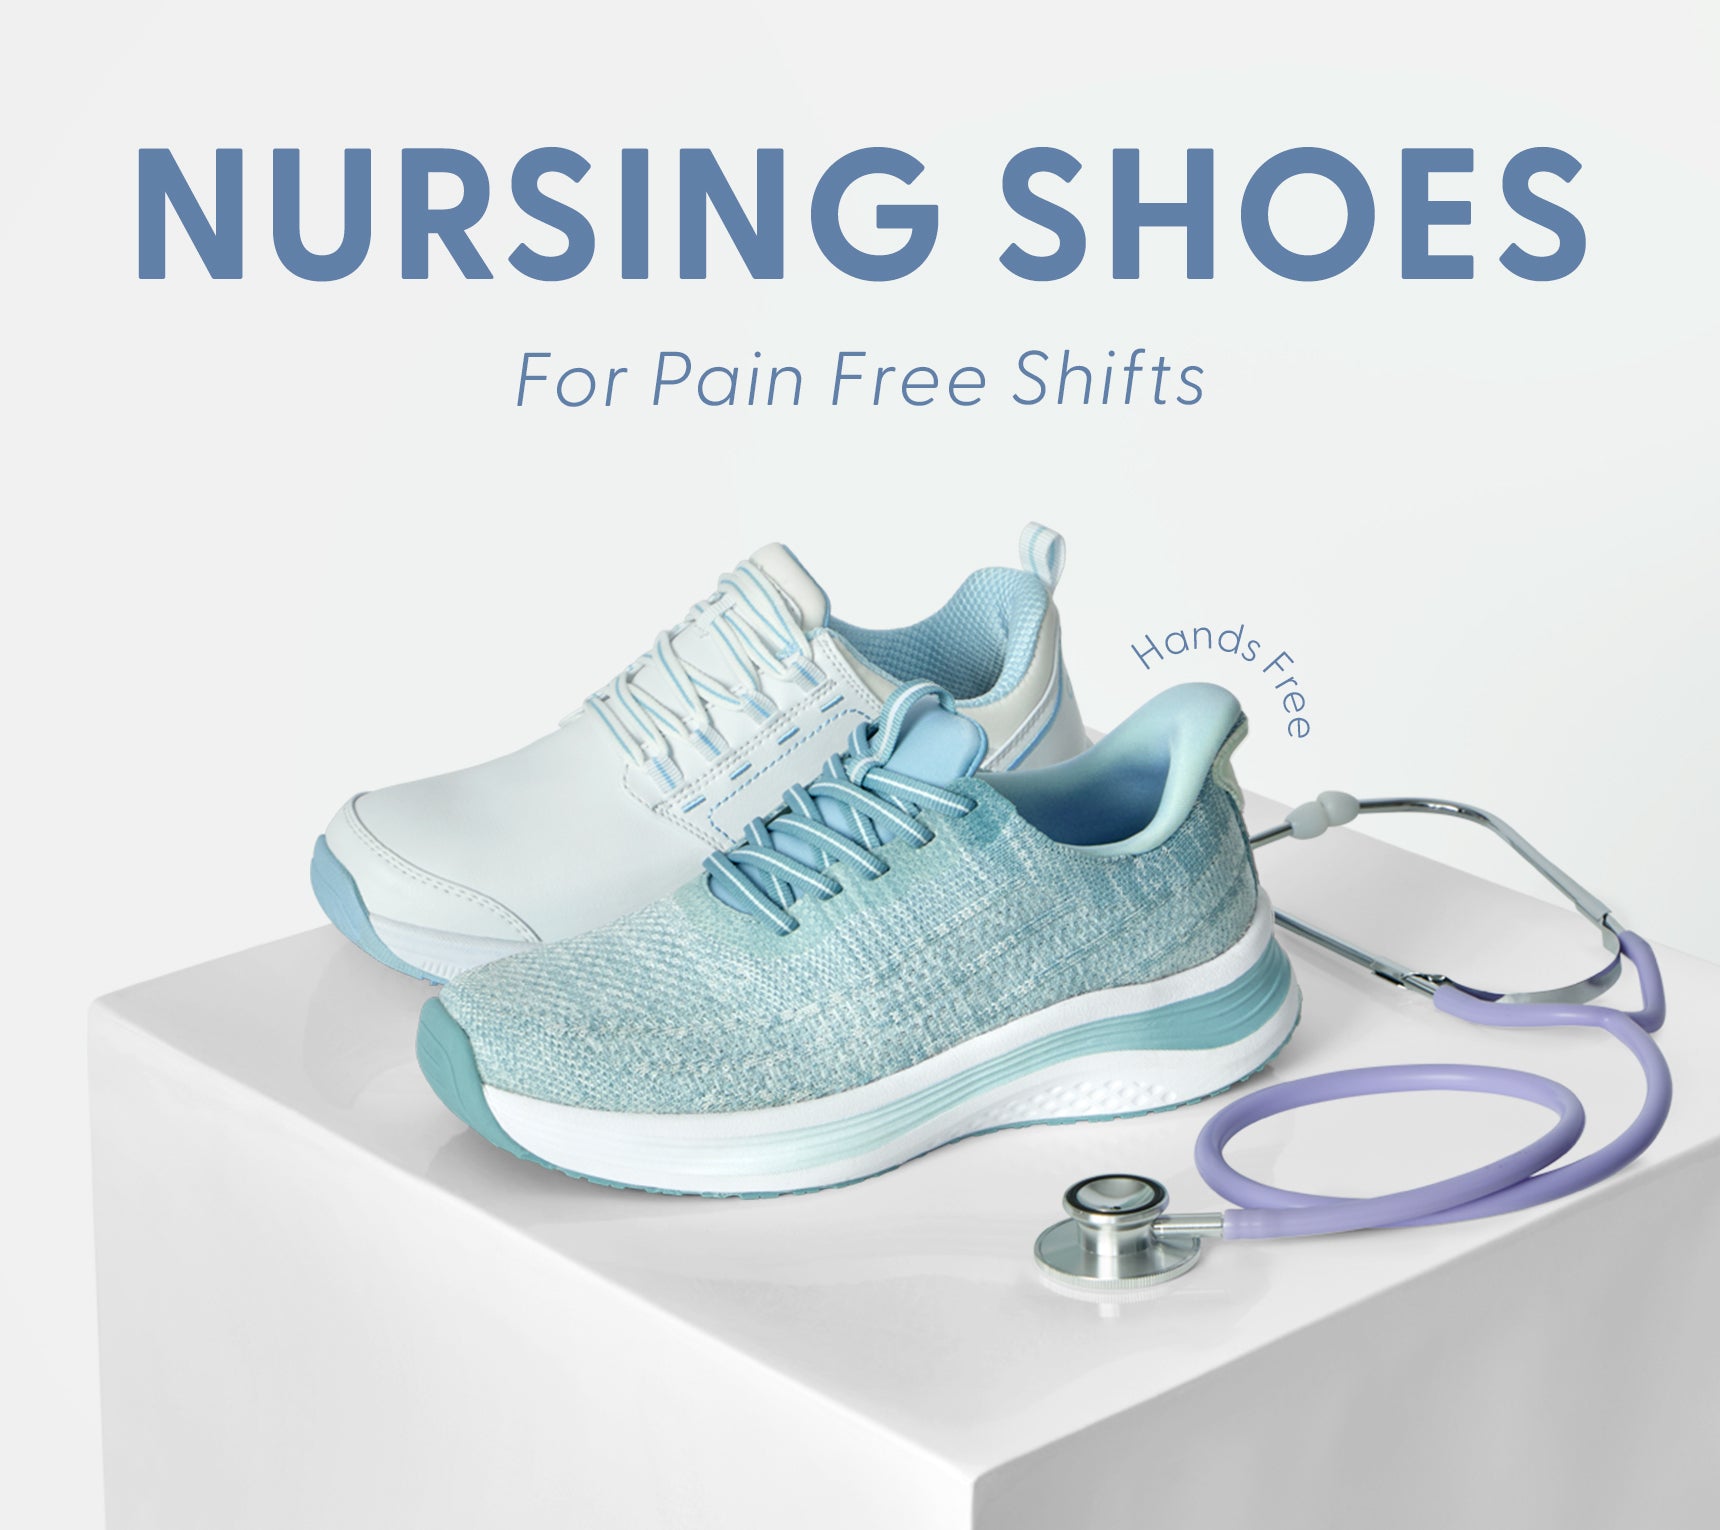 Orthofeet’s signature pain relief technology professional shoes for the front line workers